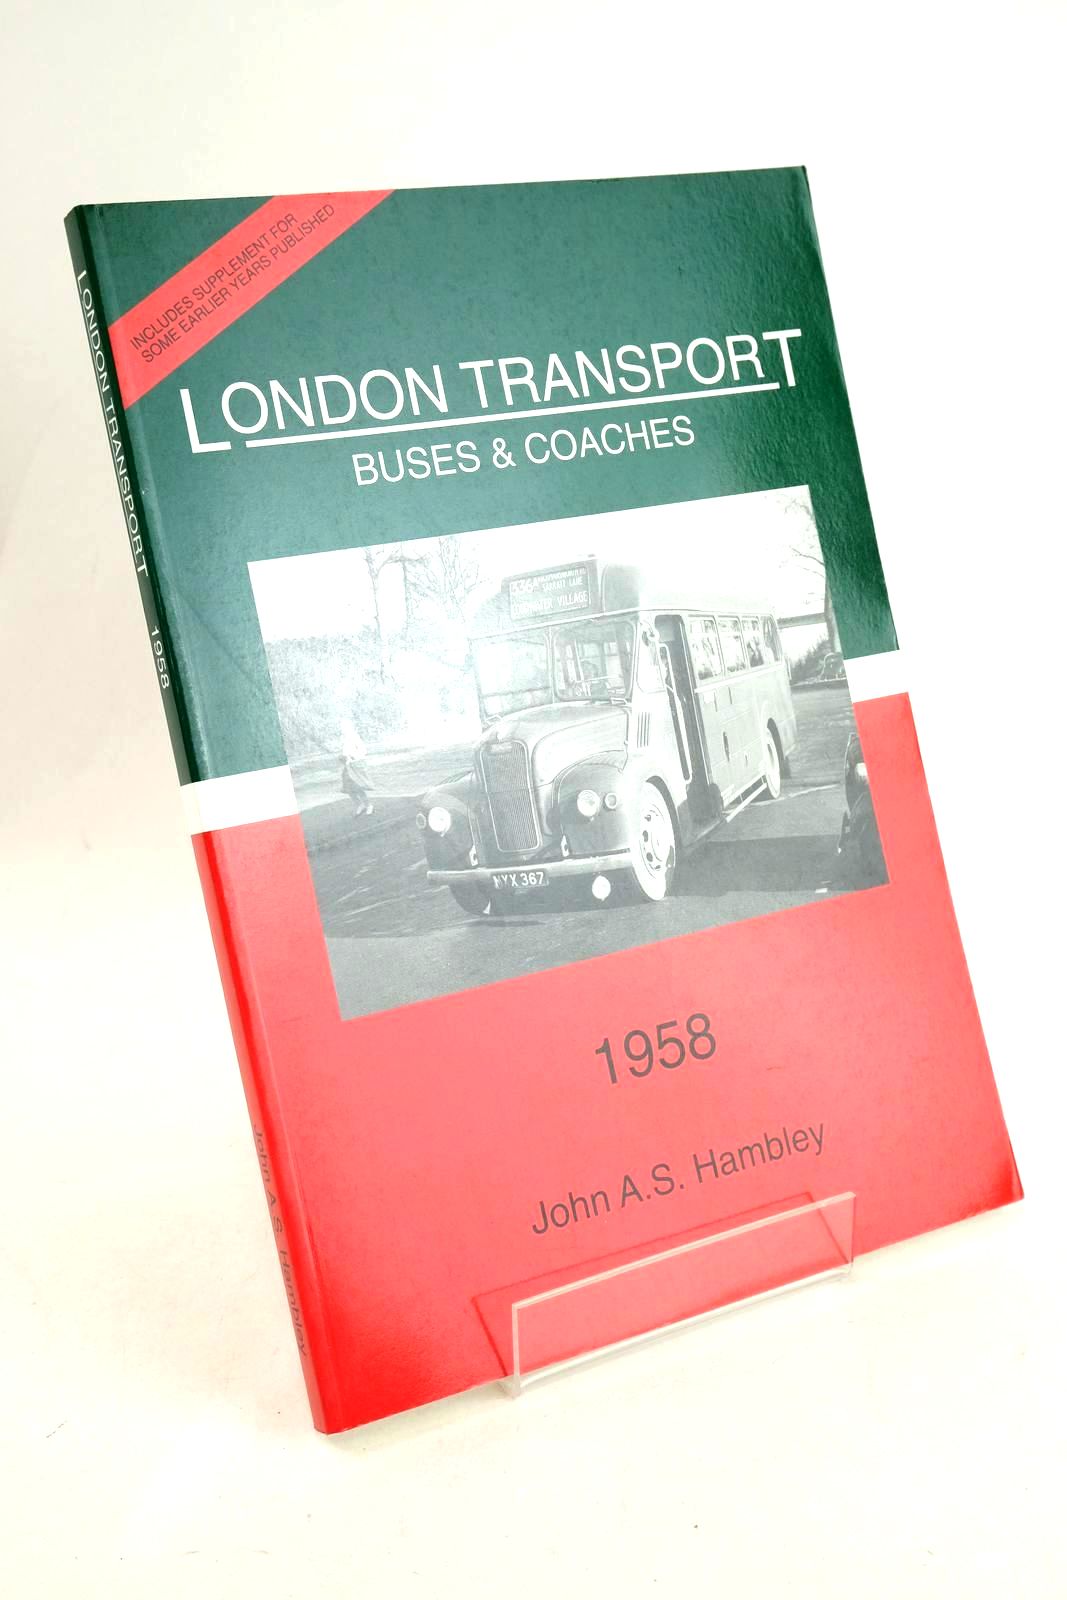 Photo of LONDON TRANSPORT BUSES & COACHES 1958 written by Hambley, John A.S. published by John A.S. Hambley (STOCK CODE: 1327380)  for sale by Stella & Rose's Books